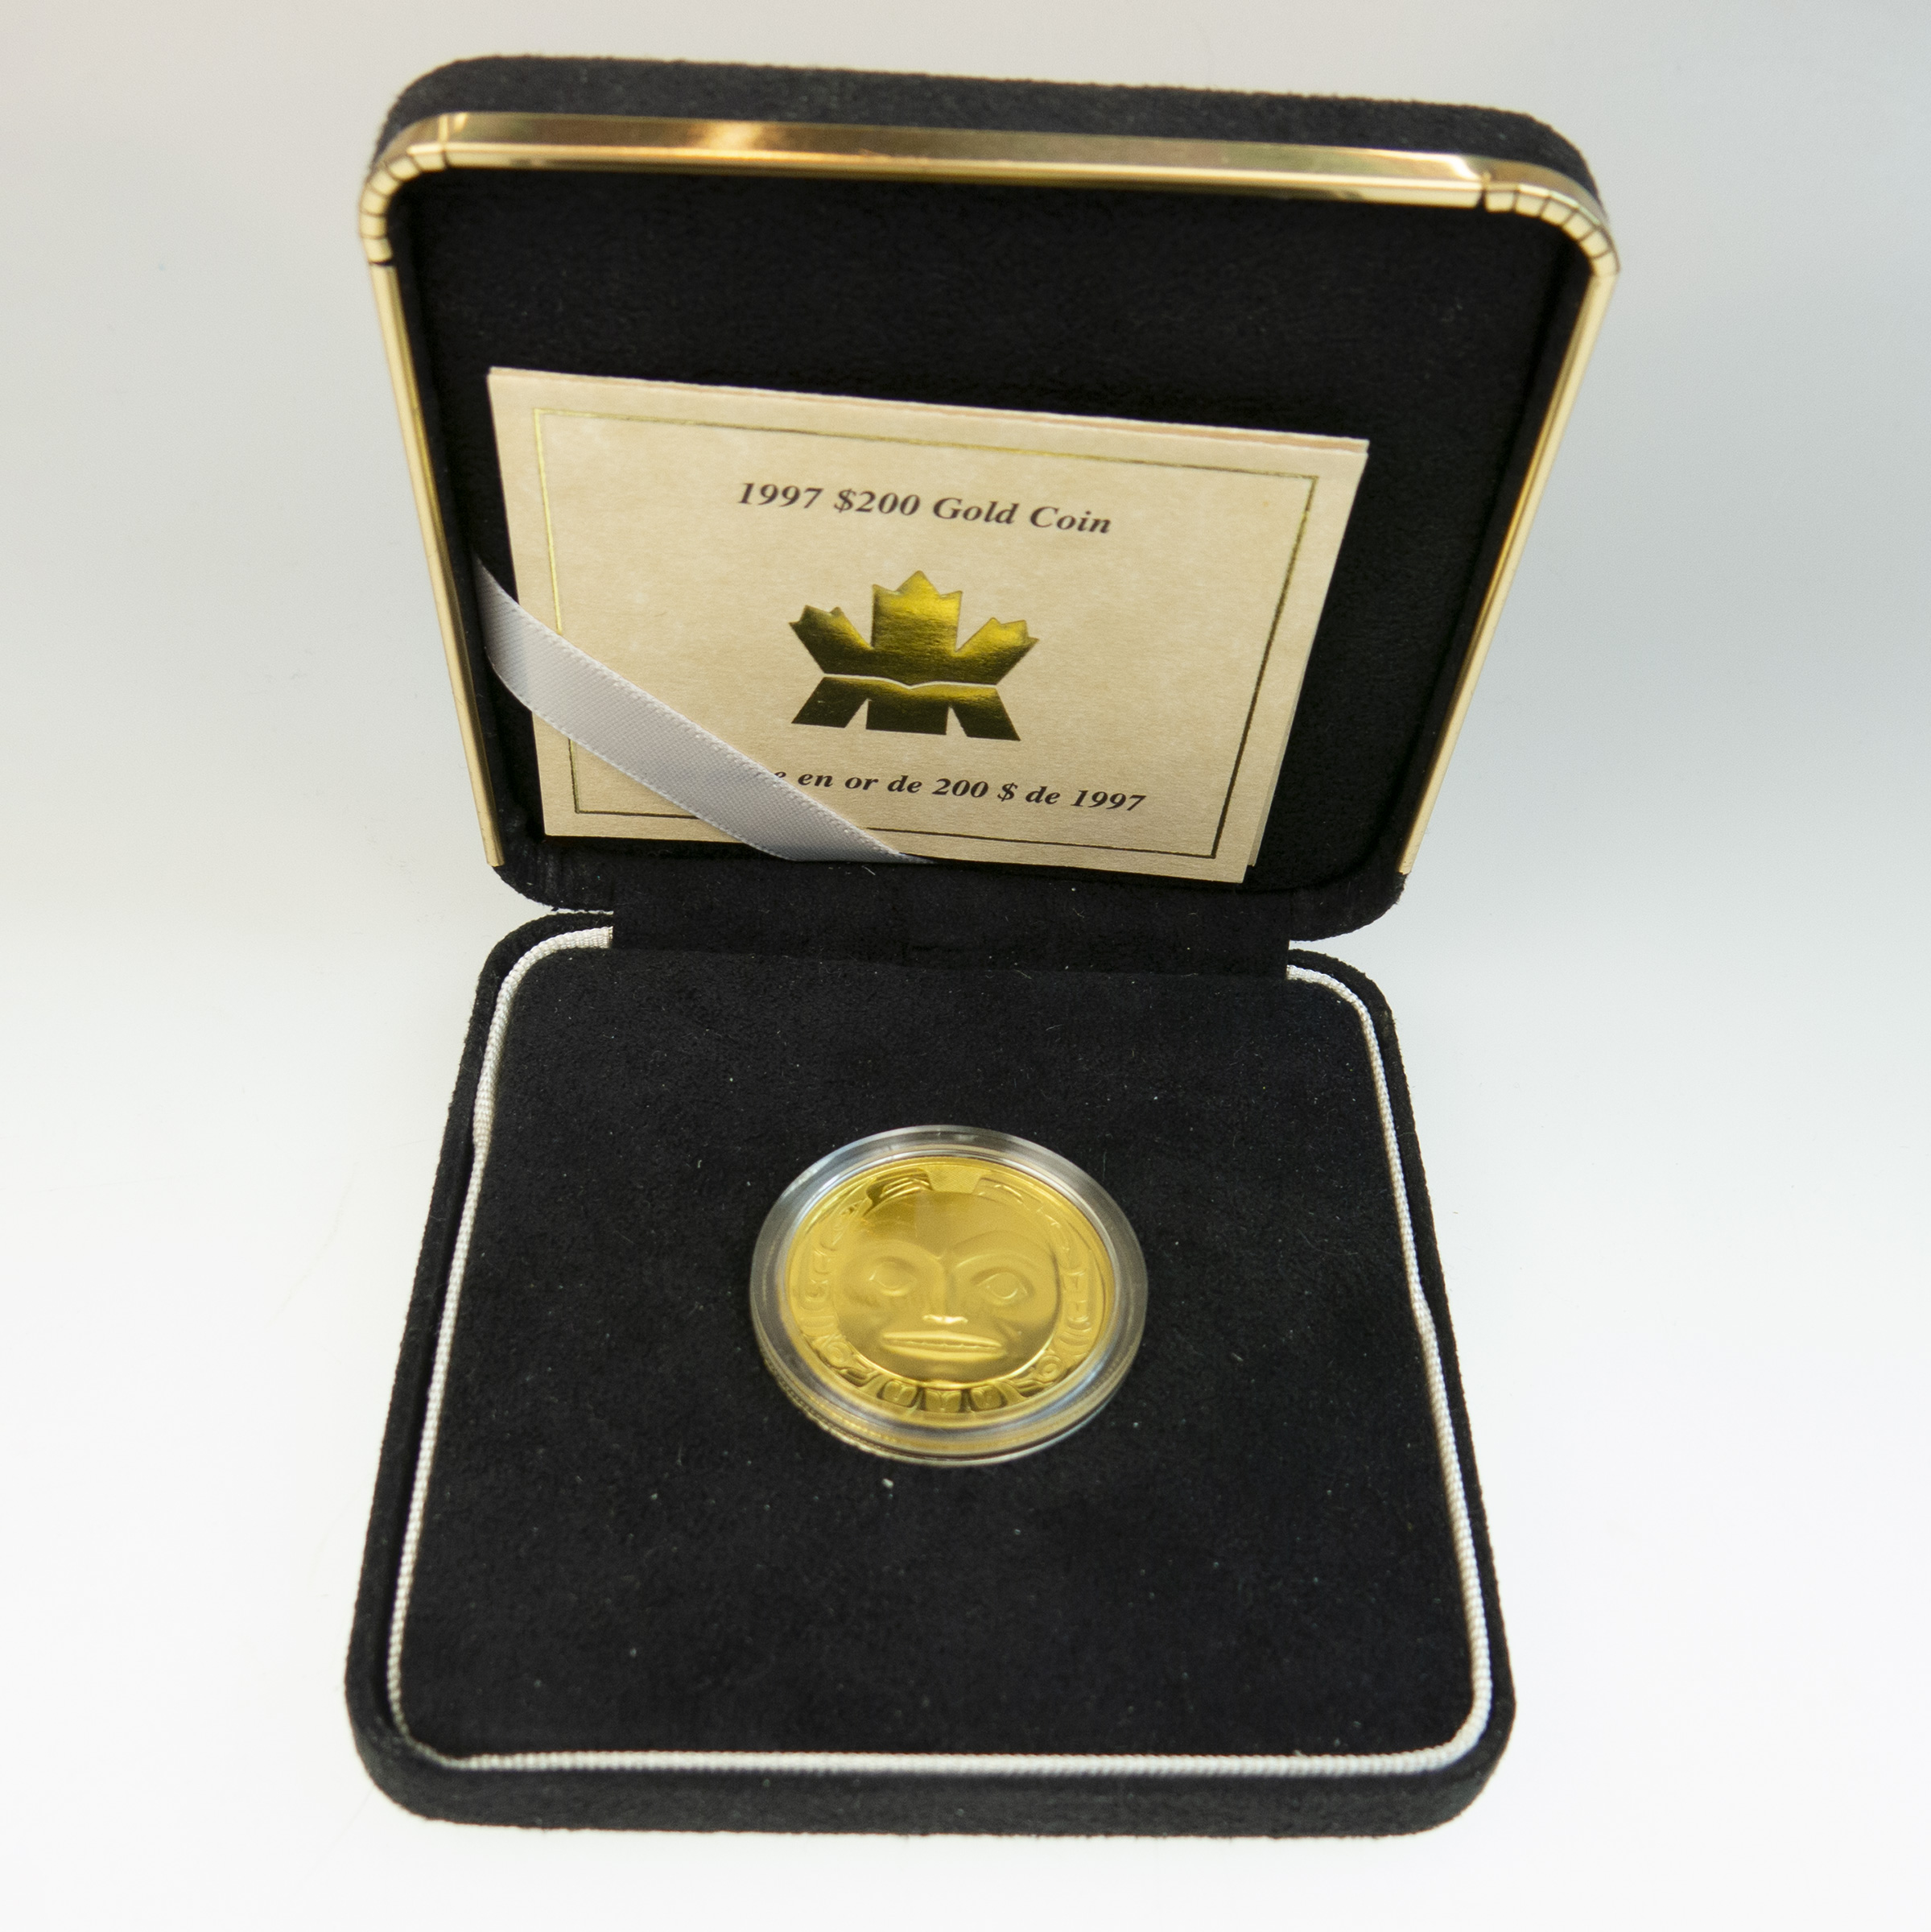 Canadian 2002 $200 Gold Coin